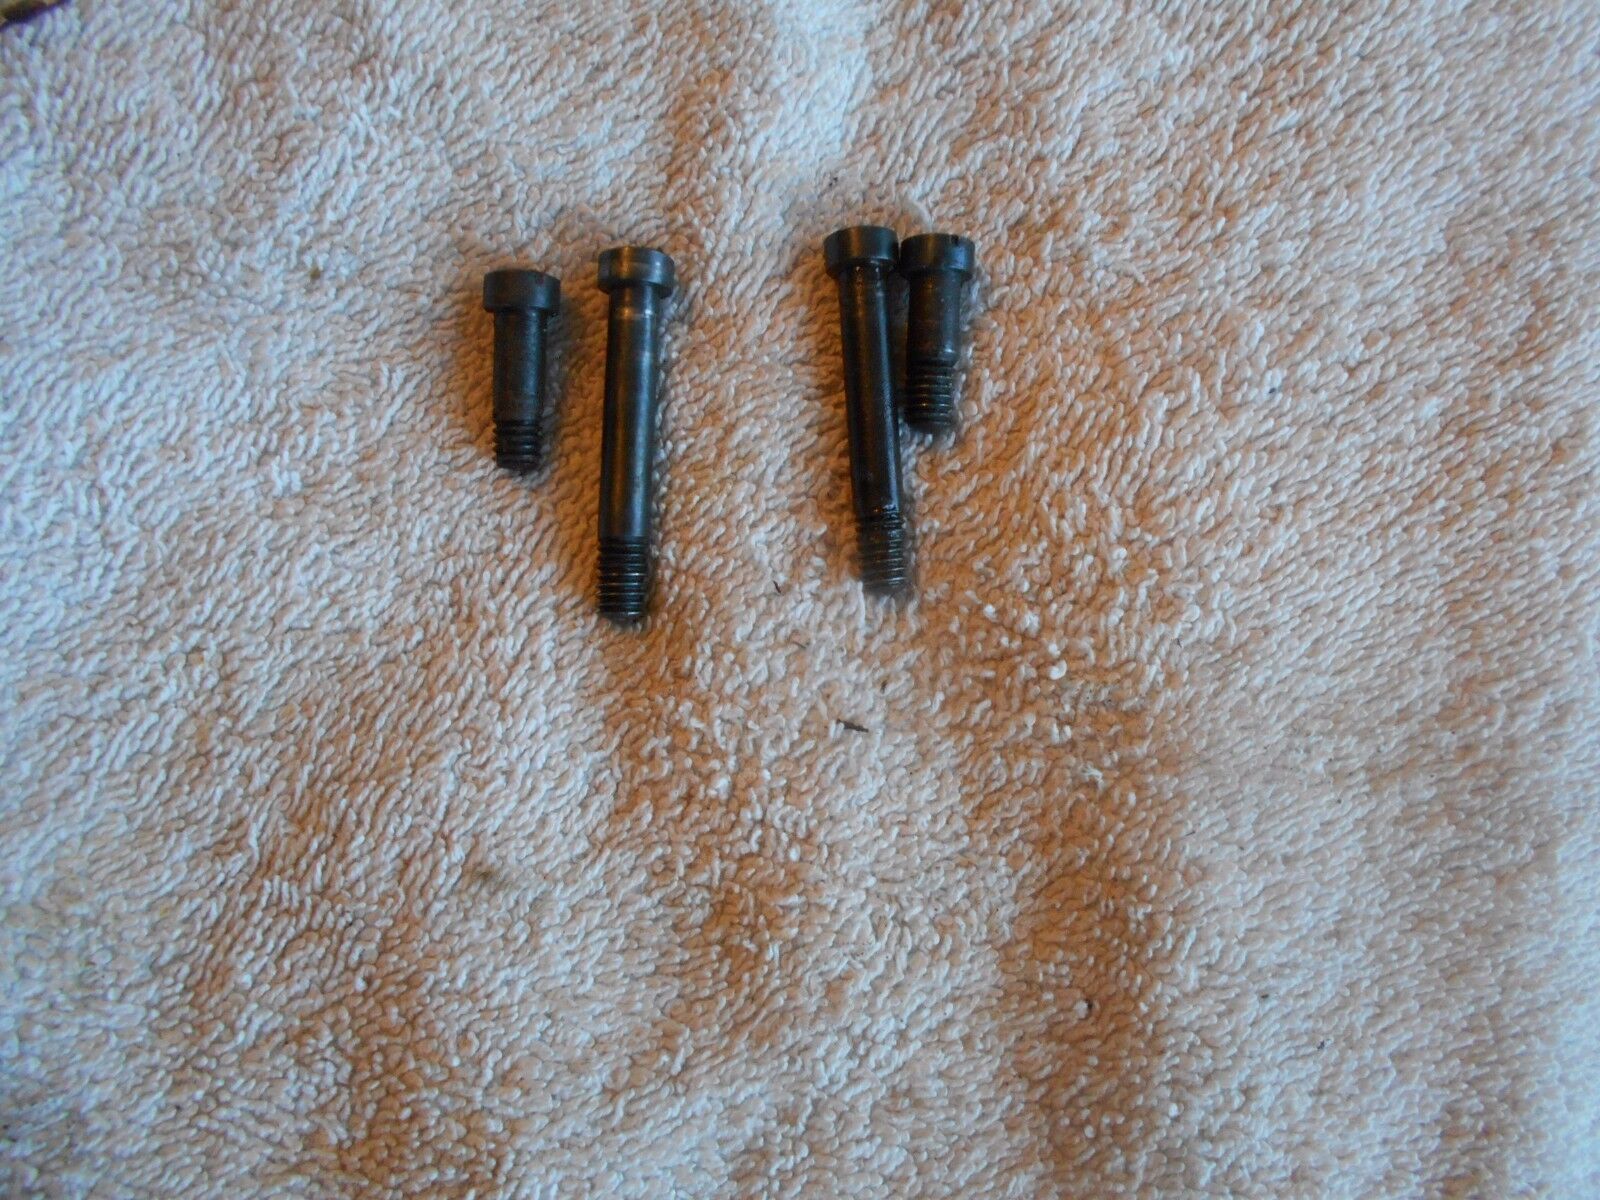 chilean marked model 1895 mauser rifle cavalry carbine triggerguard tang screws 